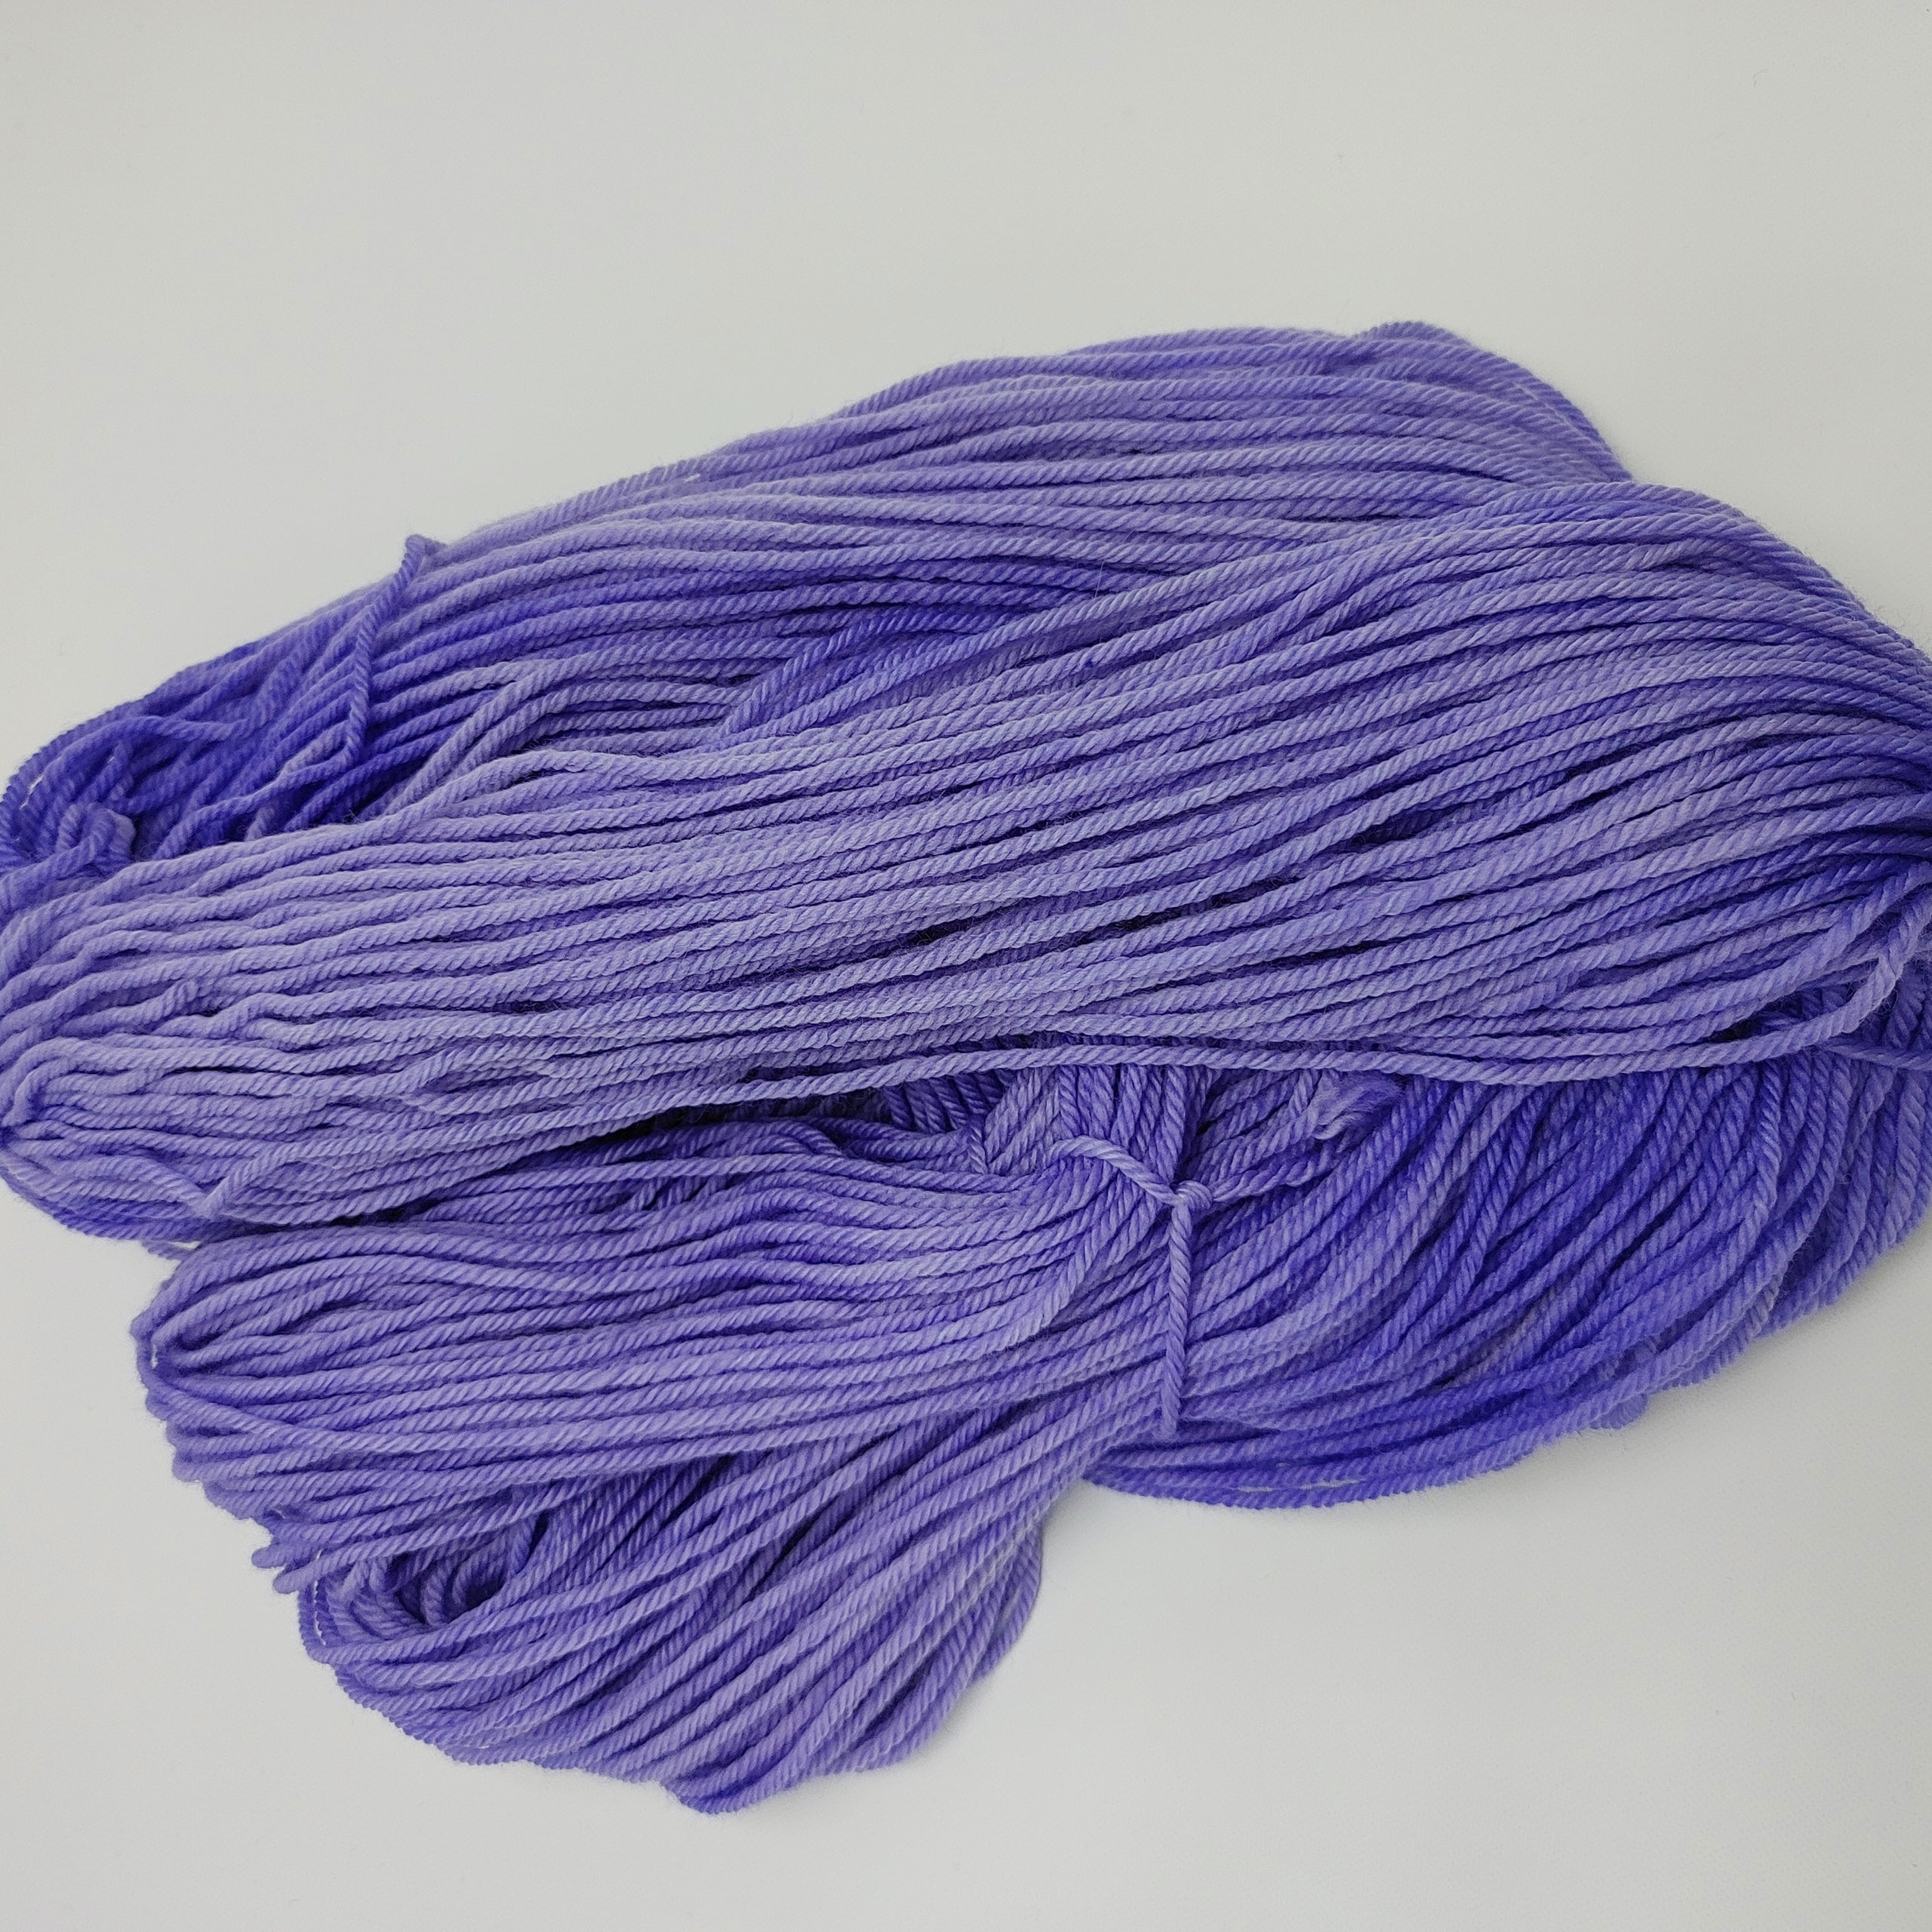 Lilac DK Weight Indie Dyed Yarn for Knitting Crocheting Weaving Hand ...